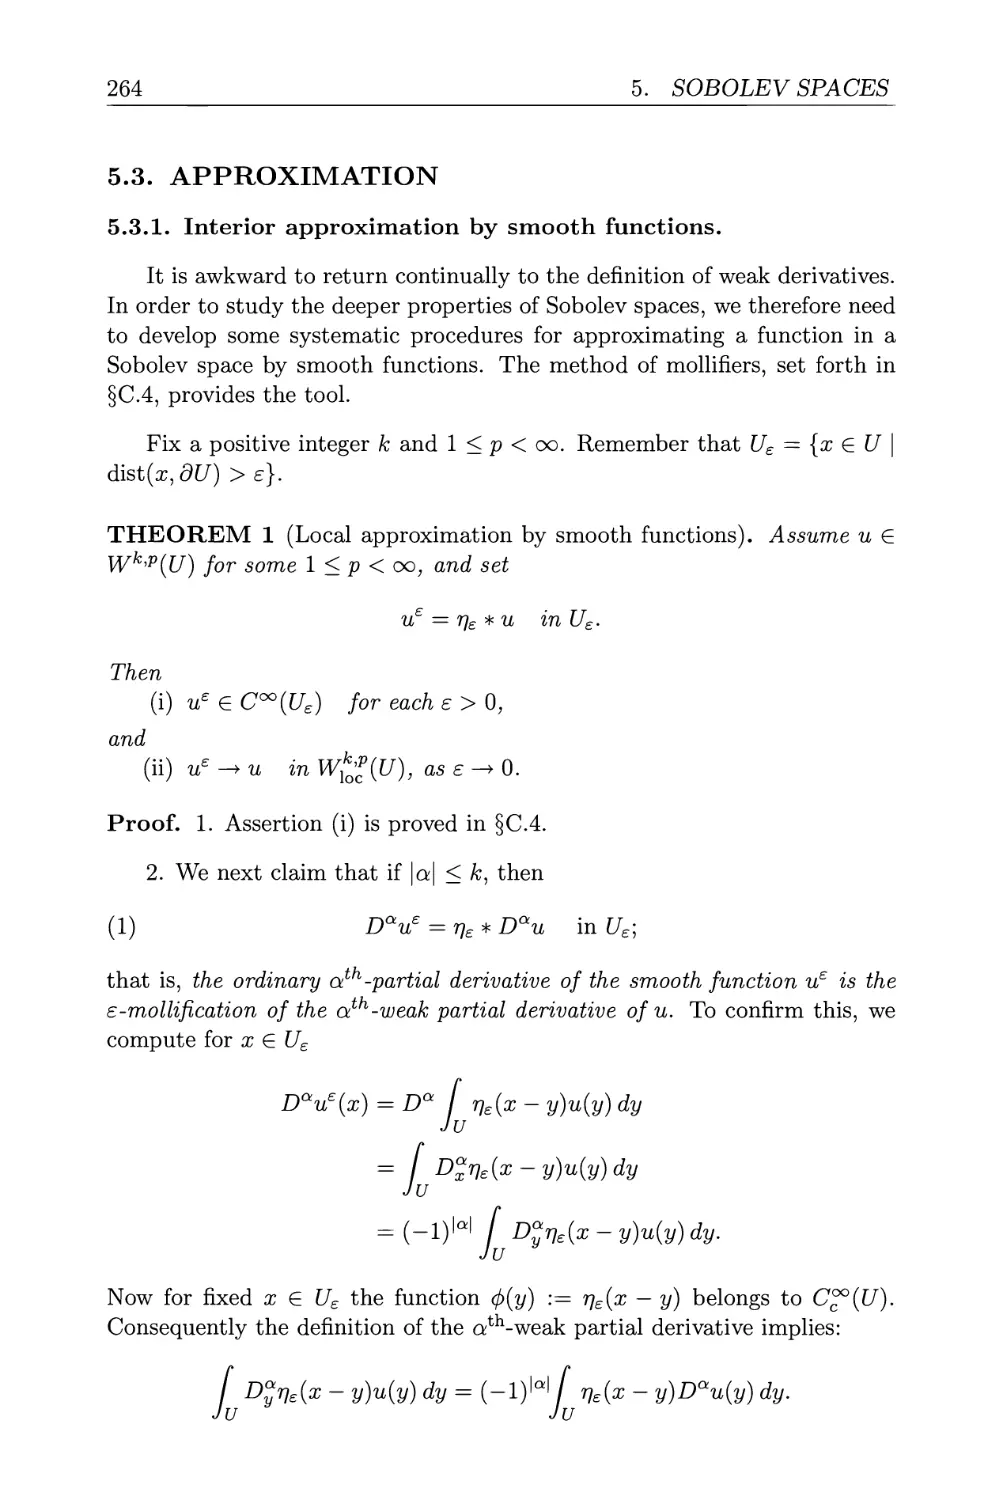 5.3. Approximation